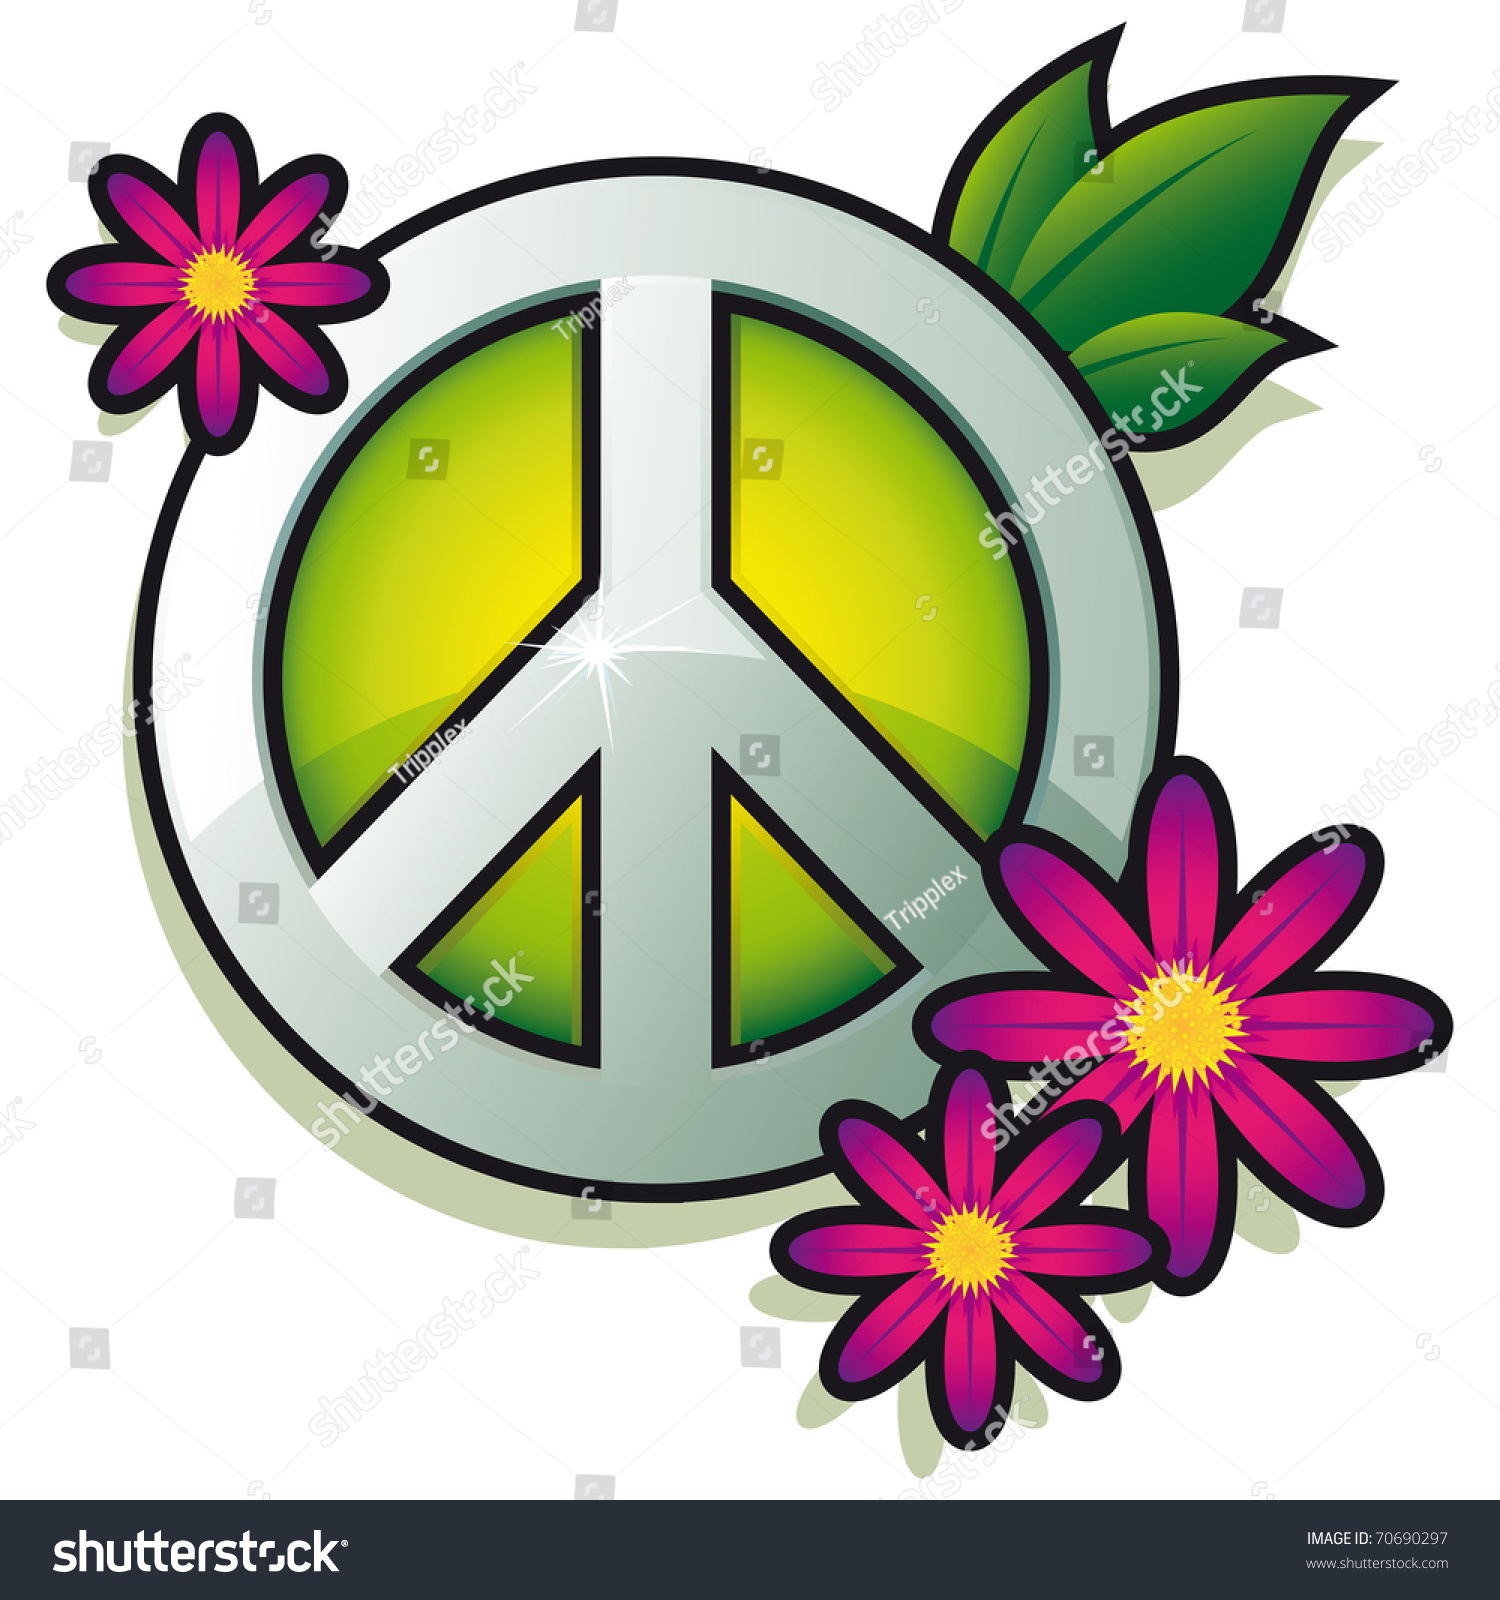 Peace Sign With Pink Flowers Isolated On White Background Vector 70690297 Shutterstock 